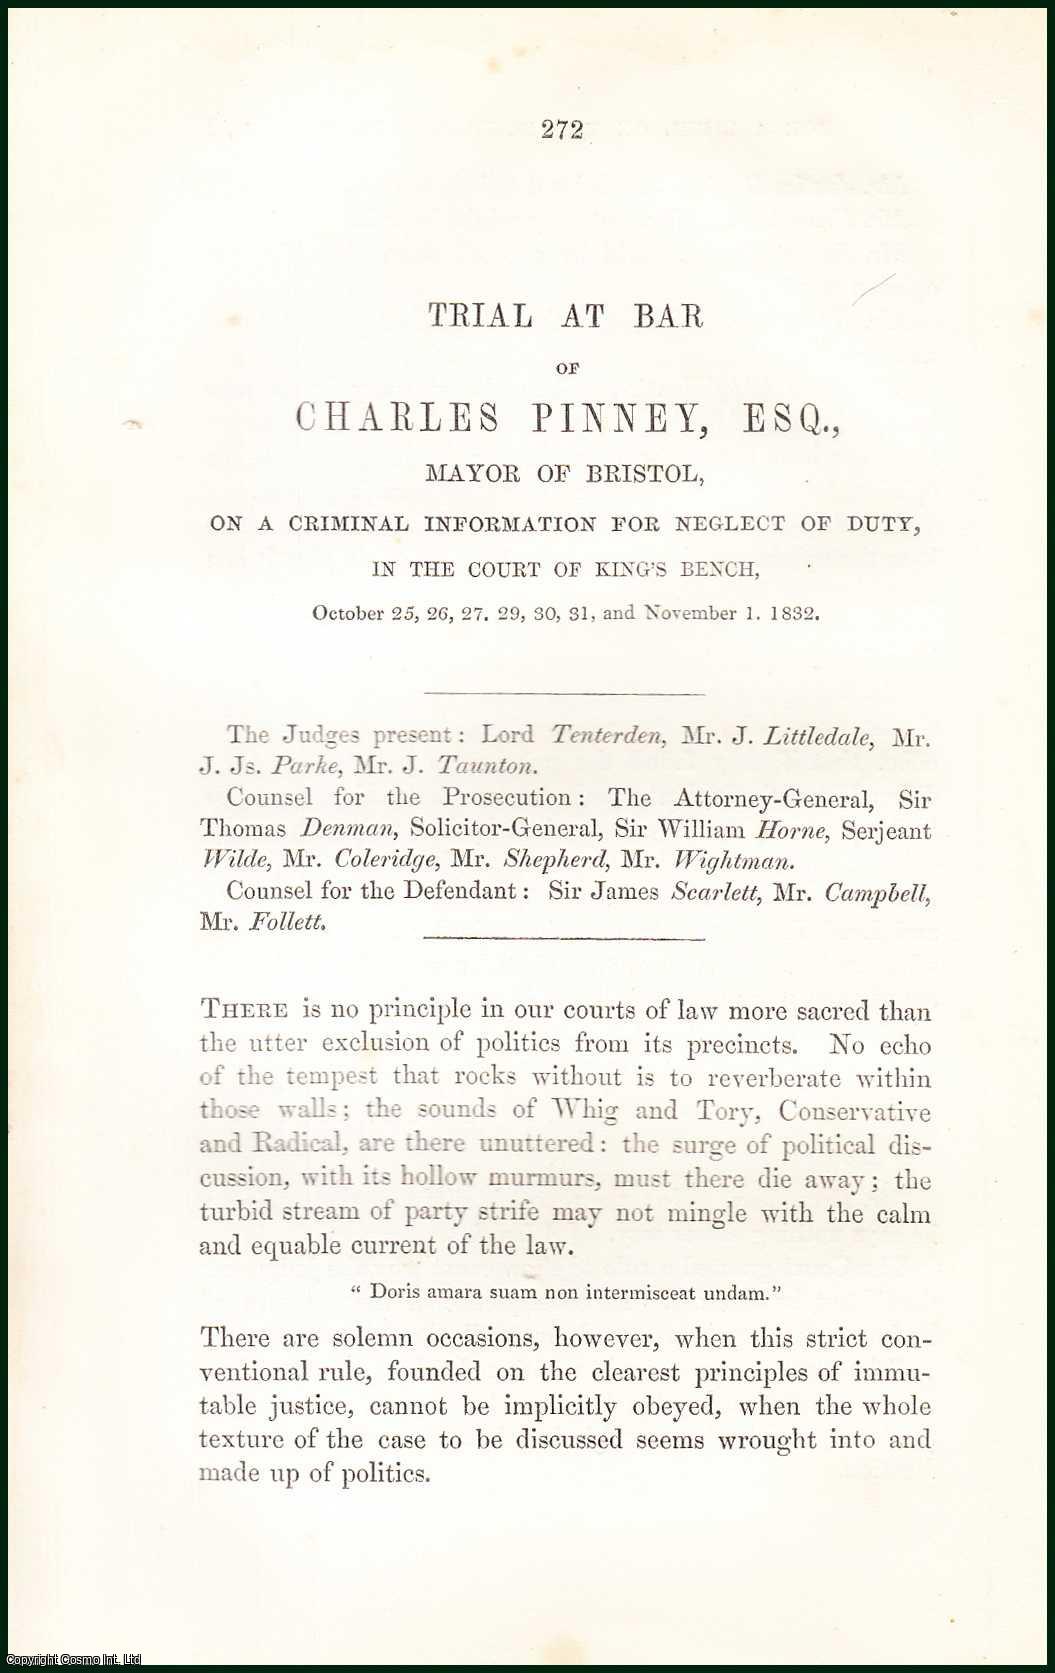 [Trial] - Trial at Bar of Charles Pinney, ESQ., Mayor of Bristol, on a Criminal Information for Neglect of Duty, in The Court of King's Bench, 1832. An uncommon original article from the Collected State Trials, 1850.